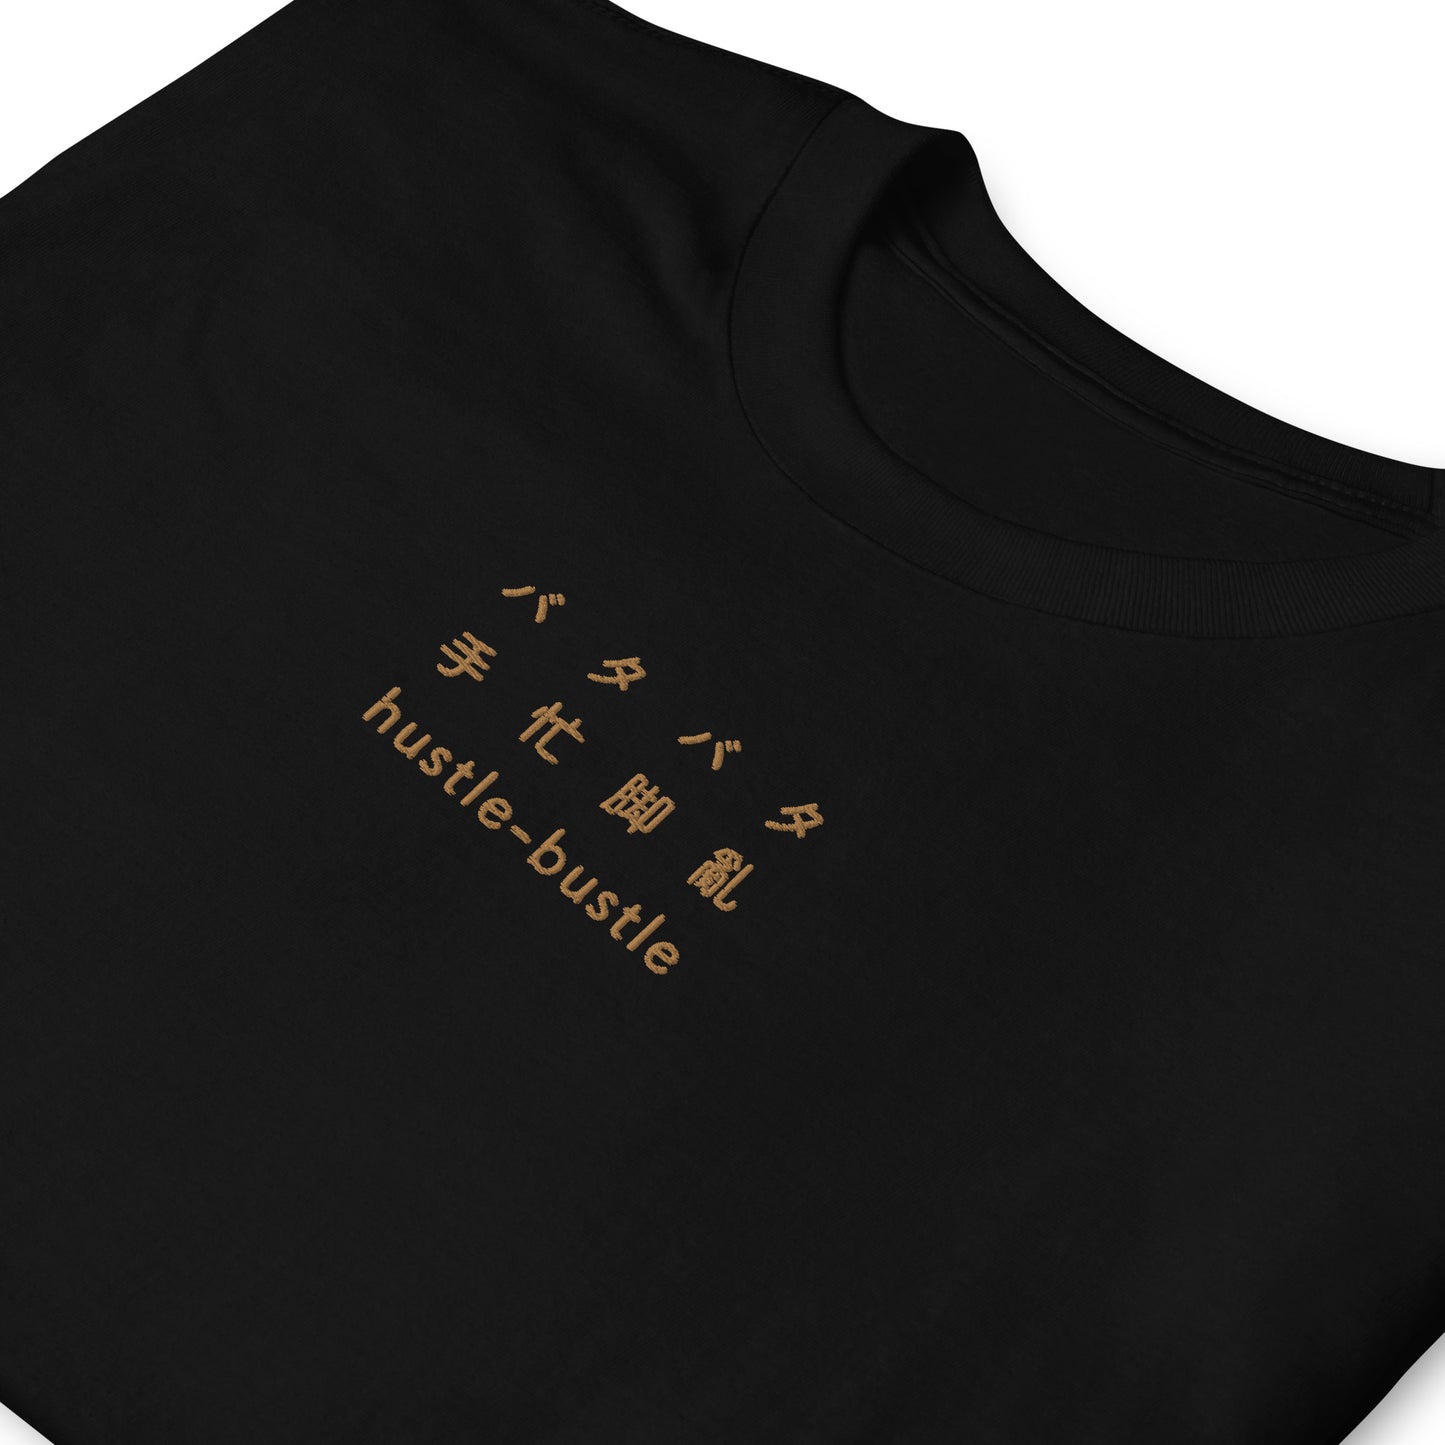 Black High Quality Tee - Front Design with an Brown Embroidery "Hustle-Bustle" in Japanese, Chinese and English